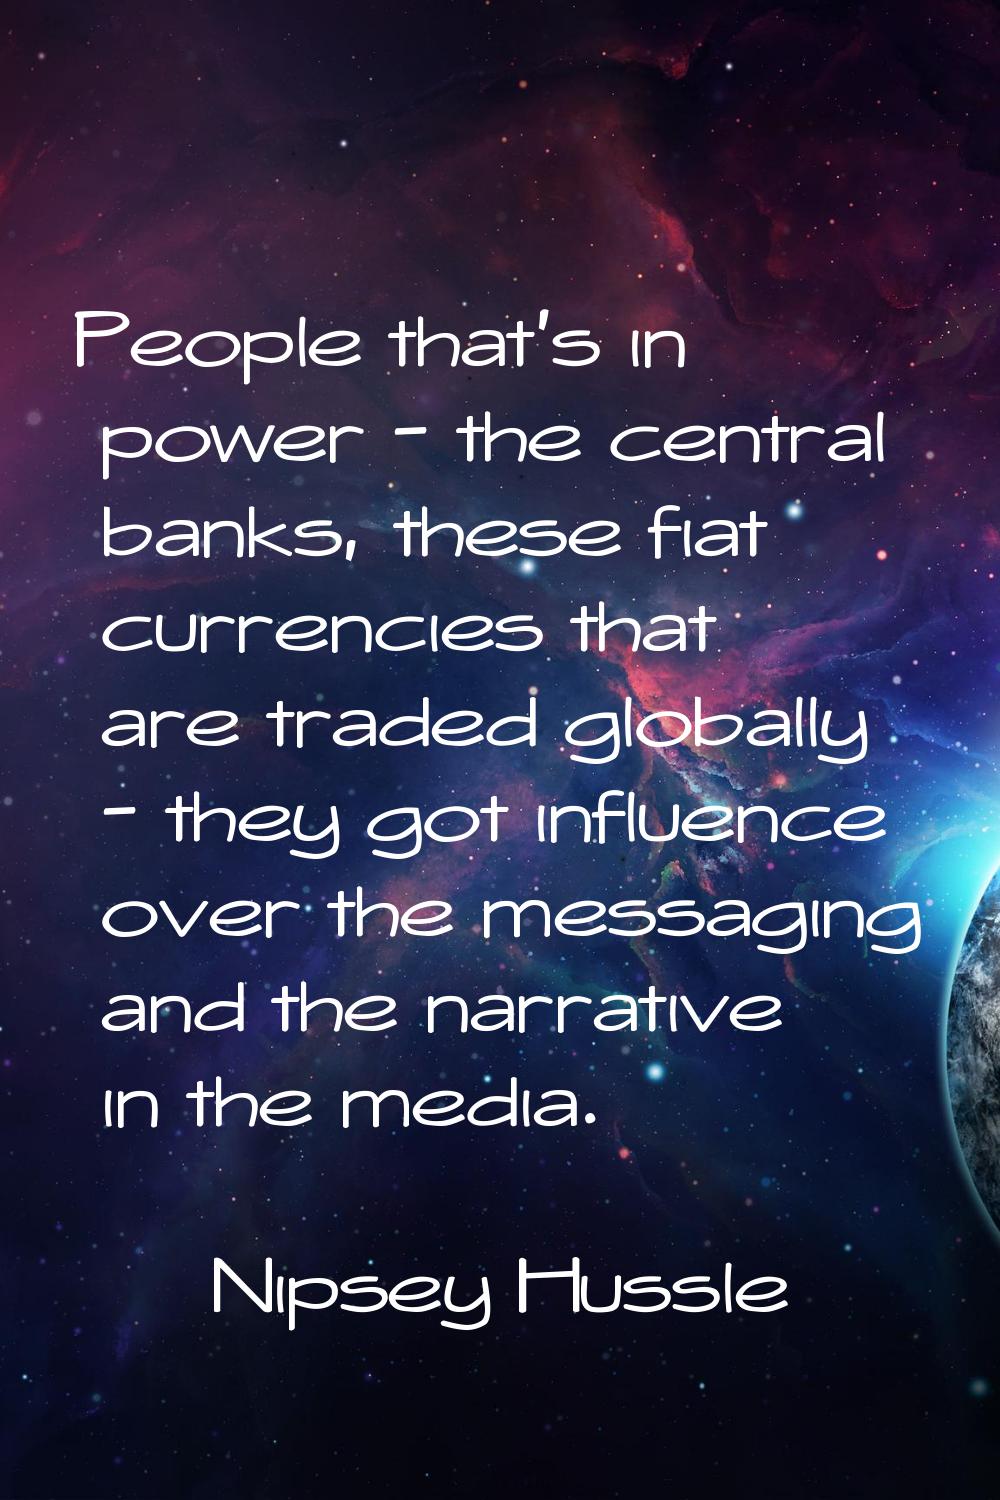 People that's in power - the central banks, these fiat currencies that are traded globally - they g